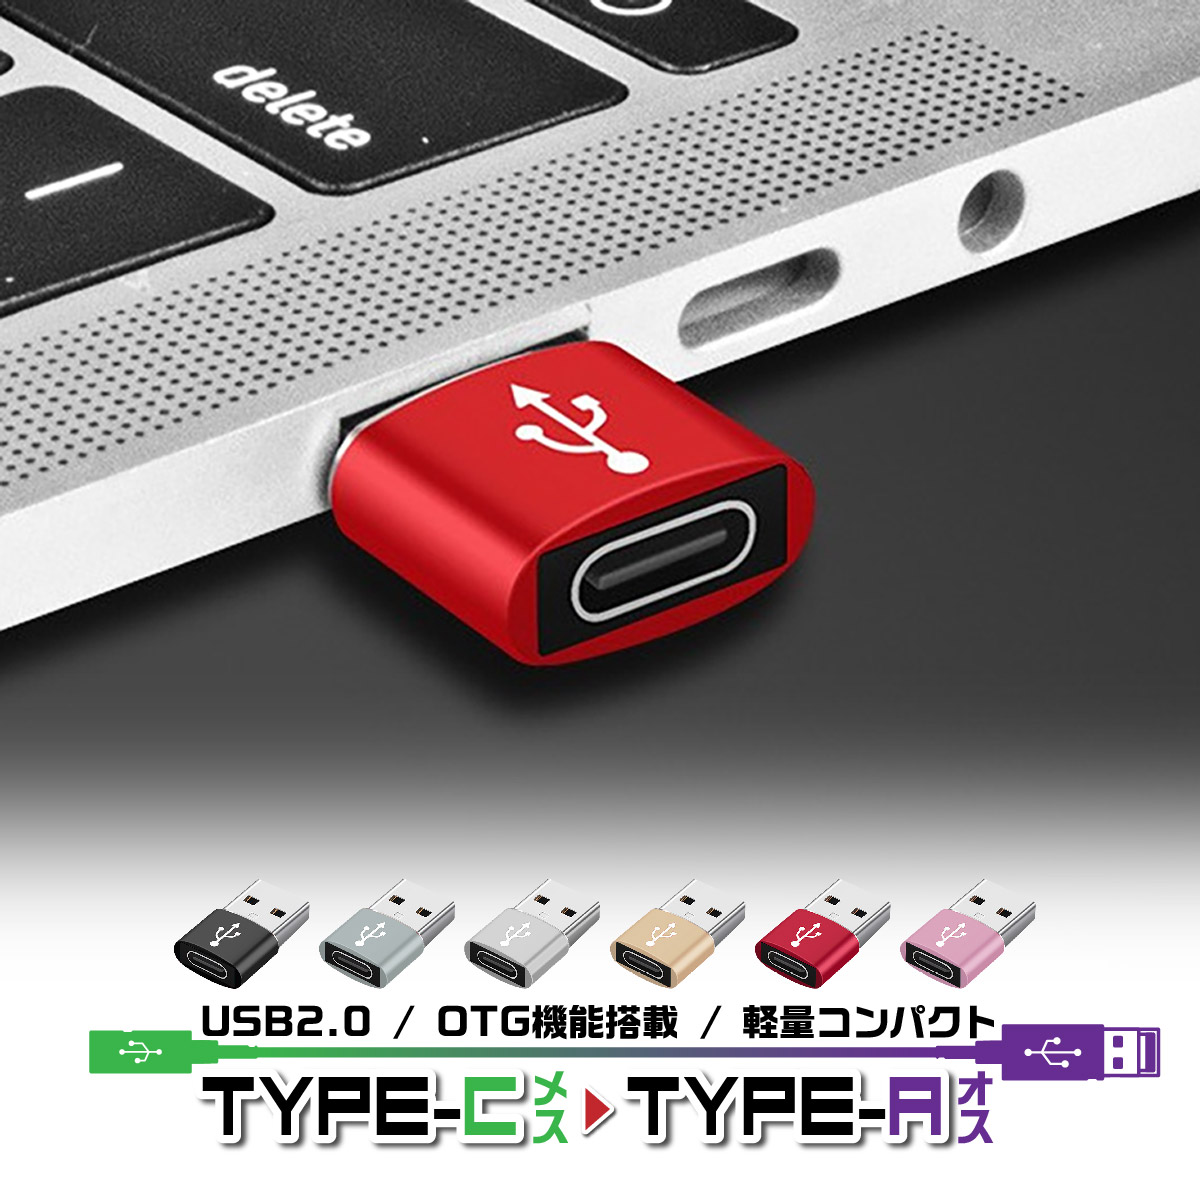 Type-C 変換アダプター USB Type-A 充電器 タイプC to USBタイプA iPhone スマホ HDD SSD パソコン ハブ データ転送 コンパクト 小さい｜heureux